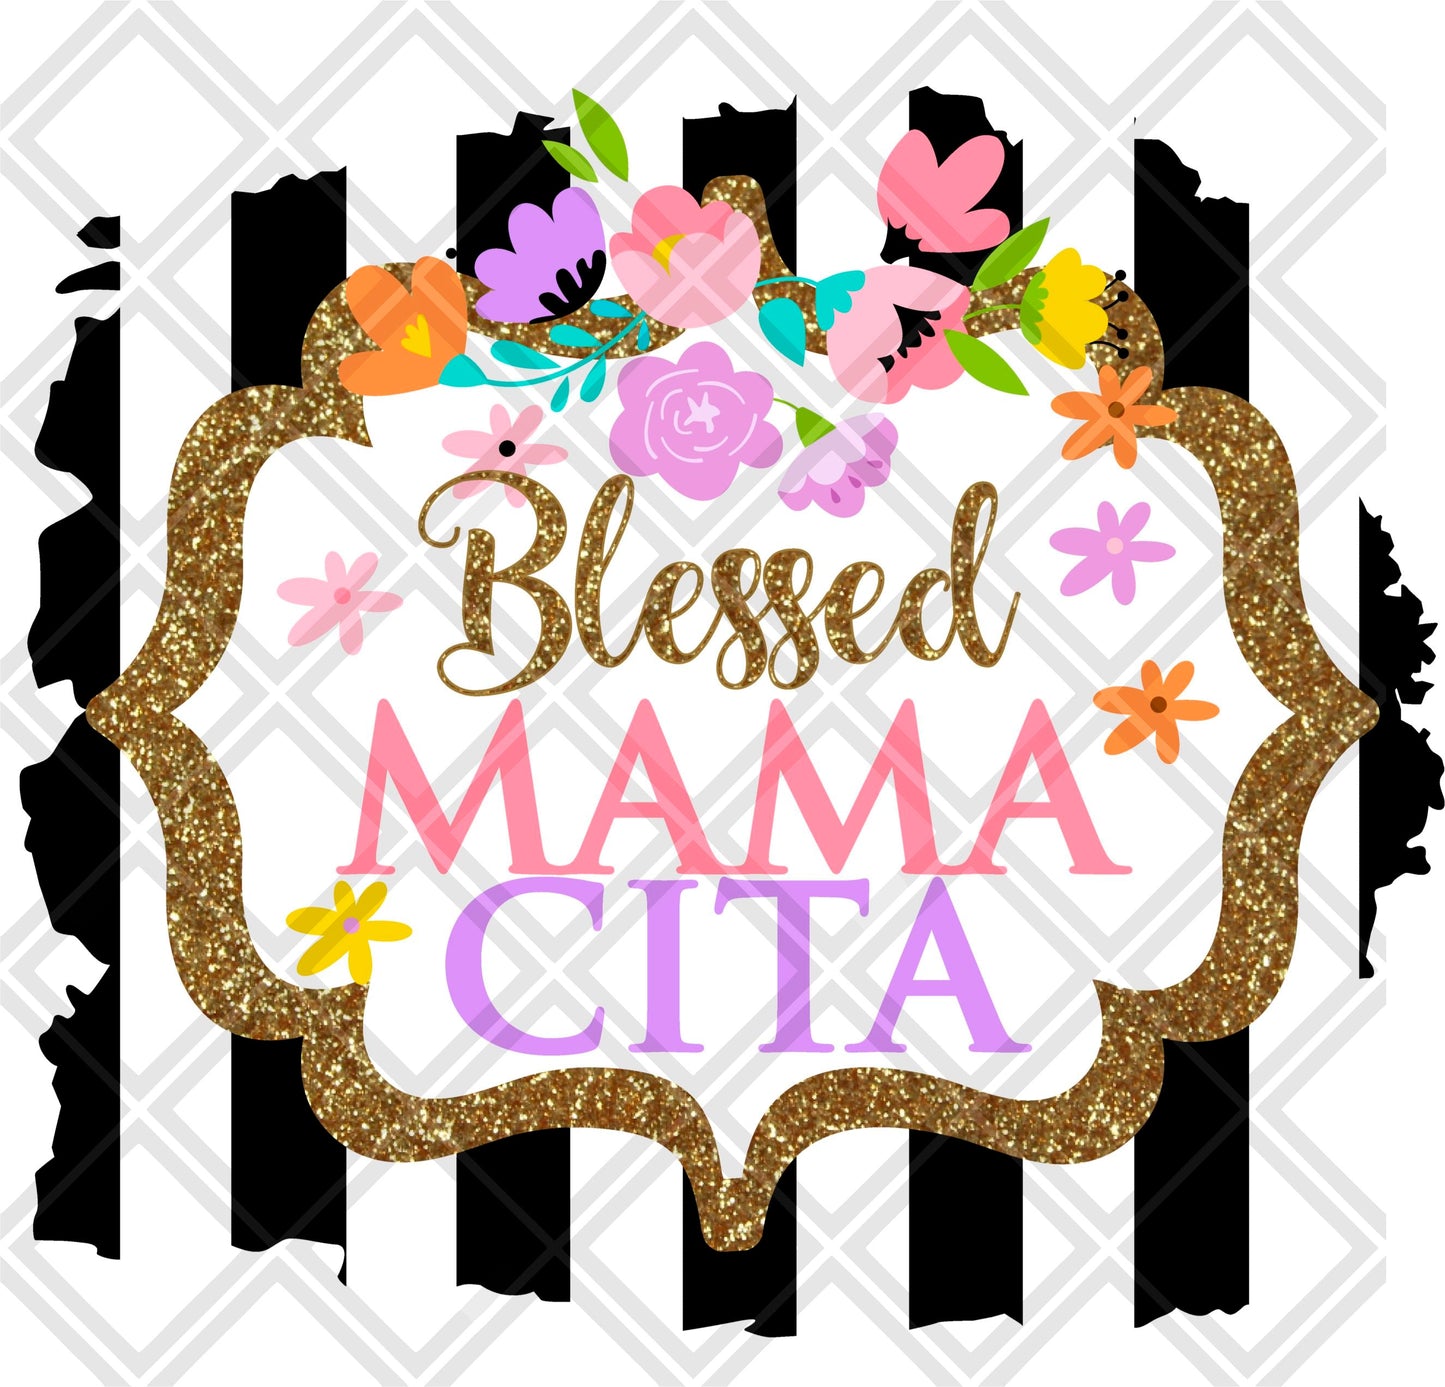 BLESSED mama cita png Digital Download Instand Download